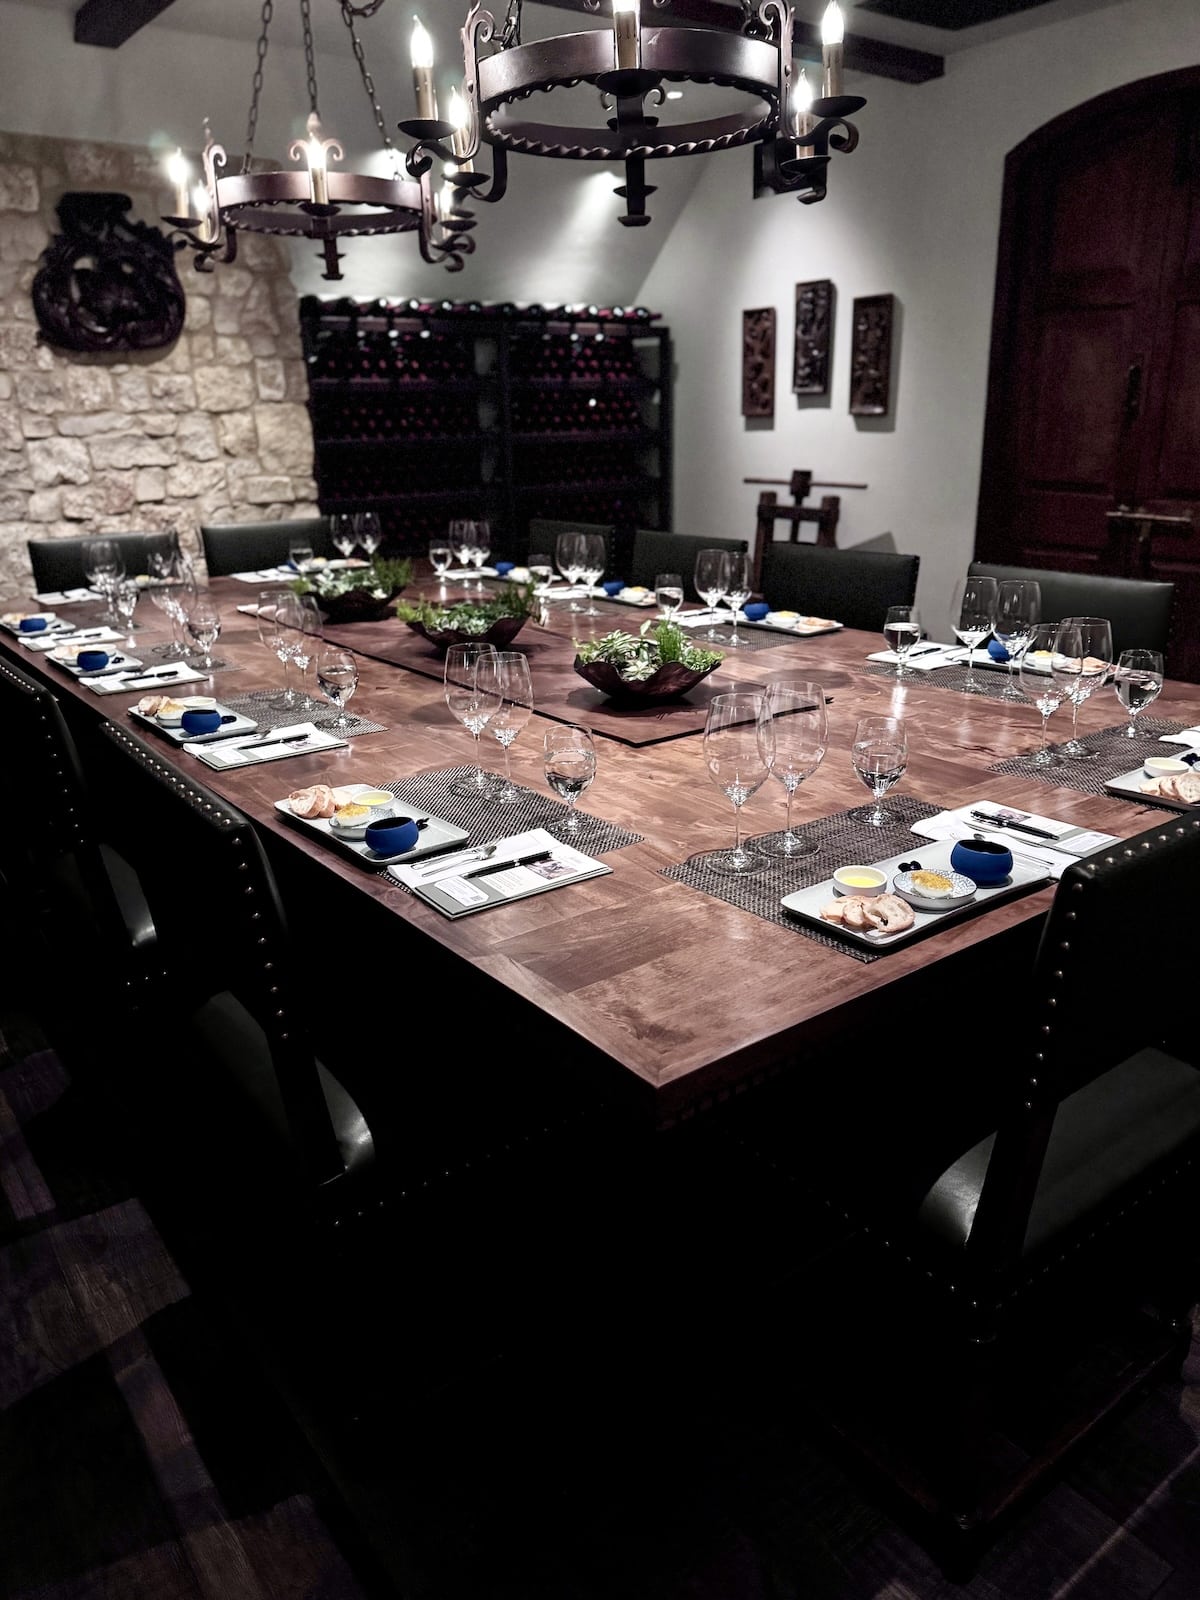 Large table set with food pairings and wine glasses.